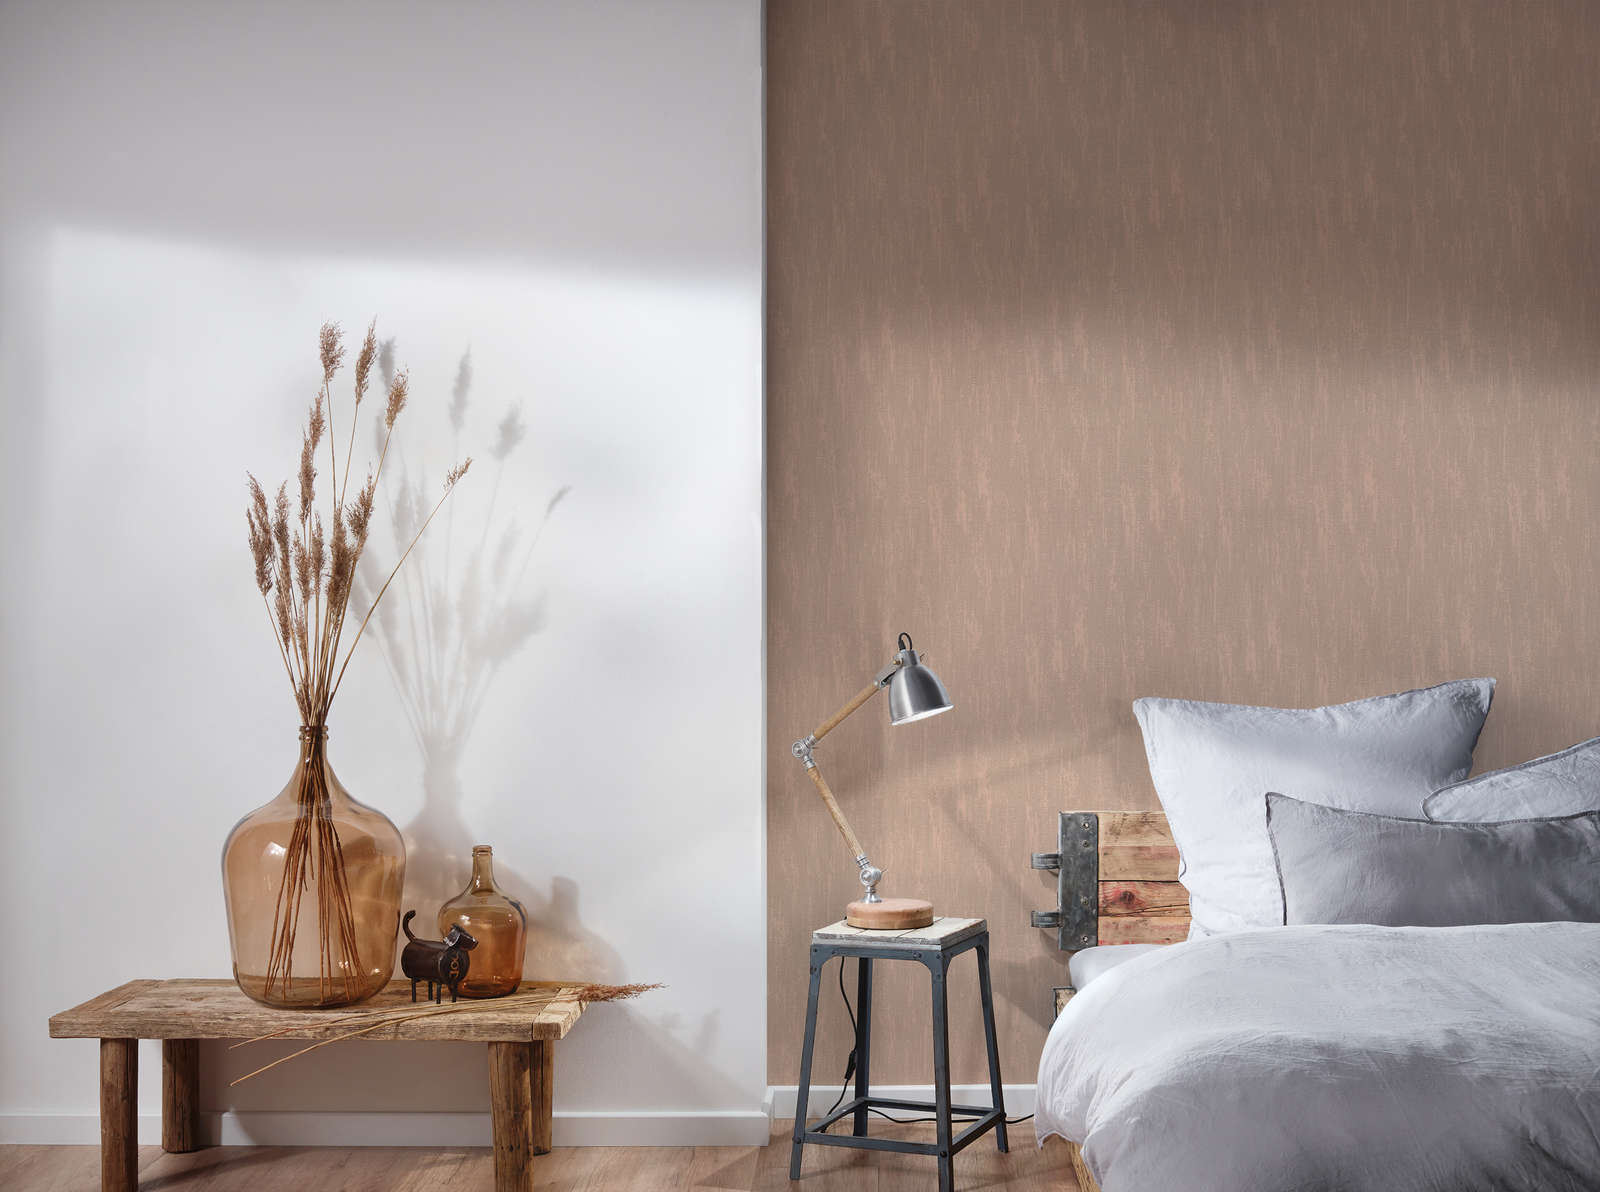             High quality non-woven wallpaper plain with glitter effect - brown
        